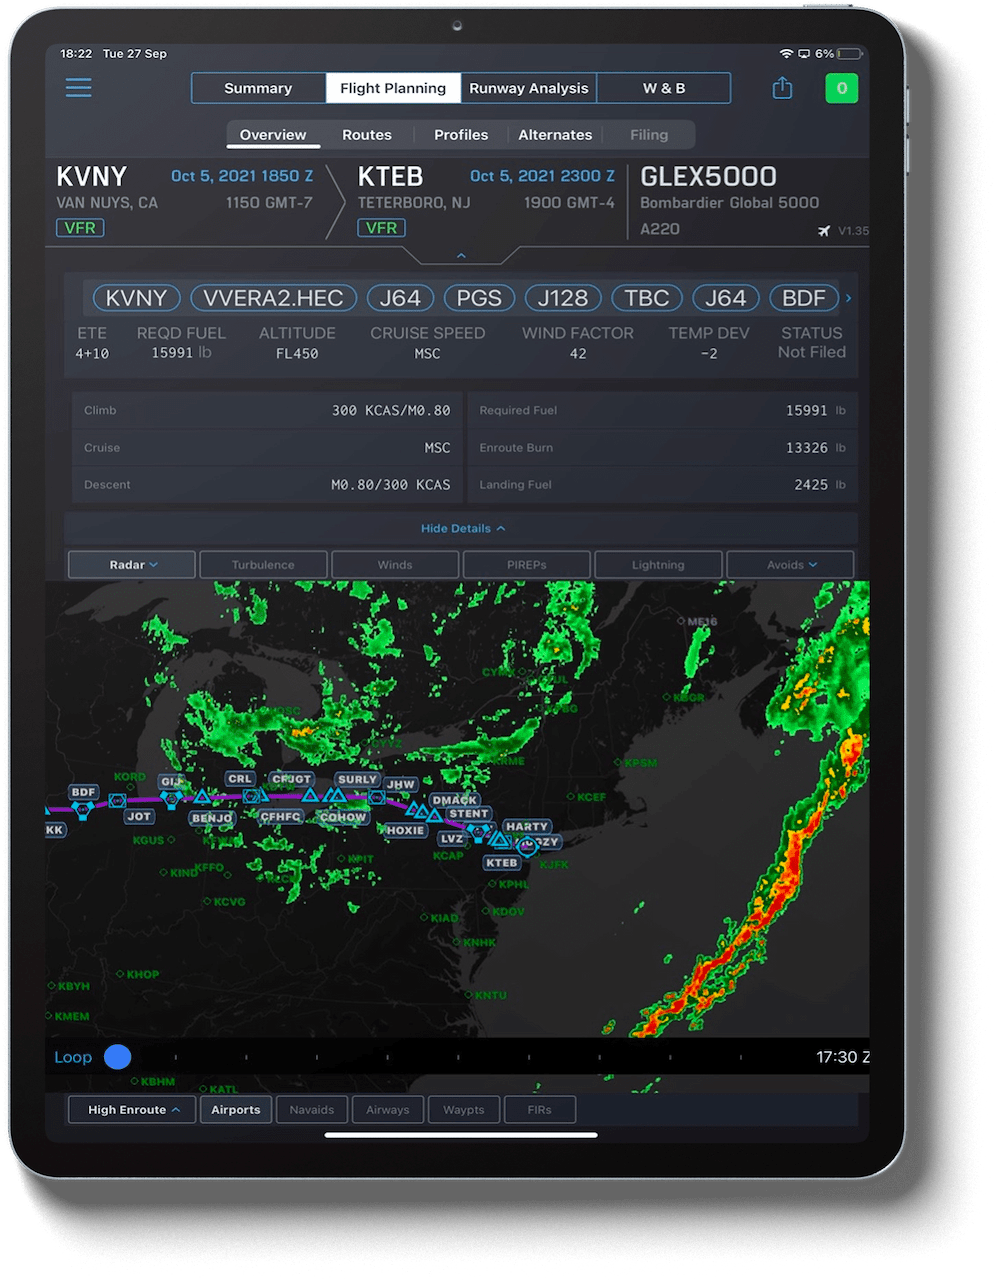 iPad flight planning app showing real-time weather data